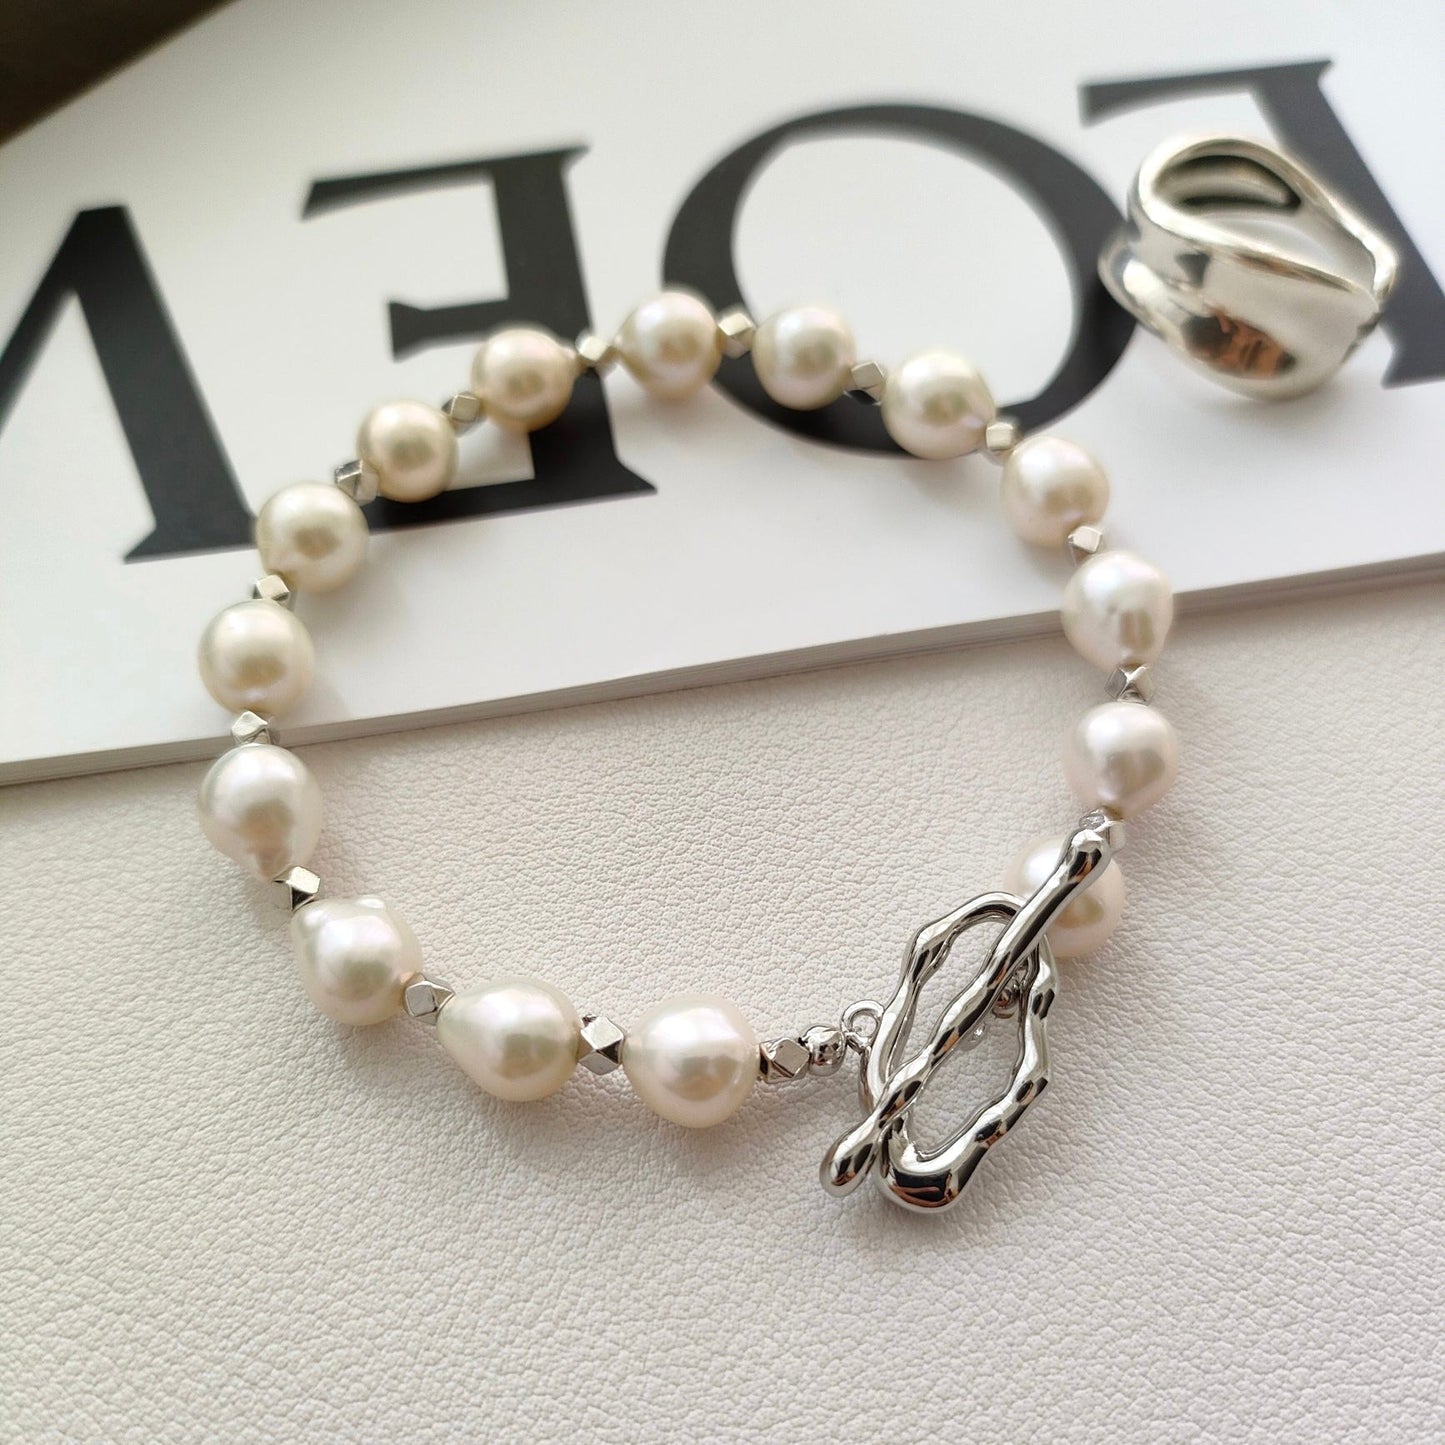 White Gold Plated Silver Freshwater Pearl Bracelet - neverland accessories